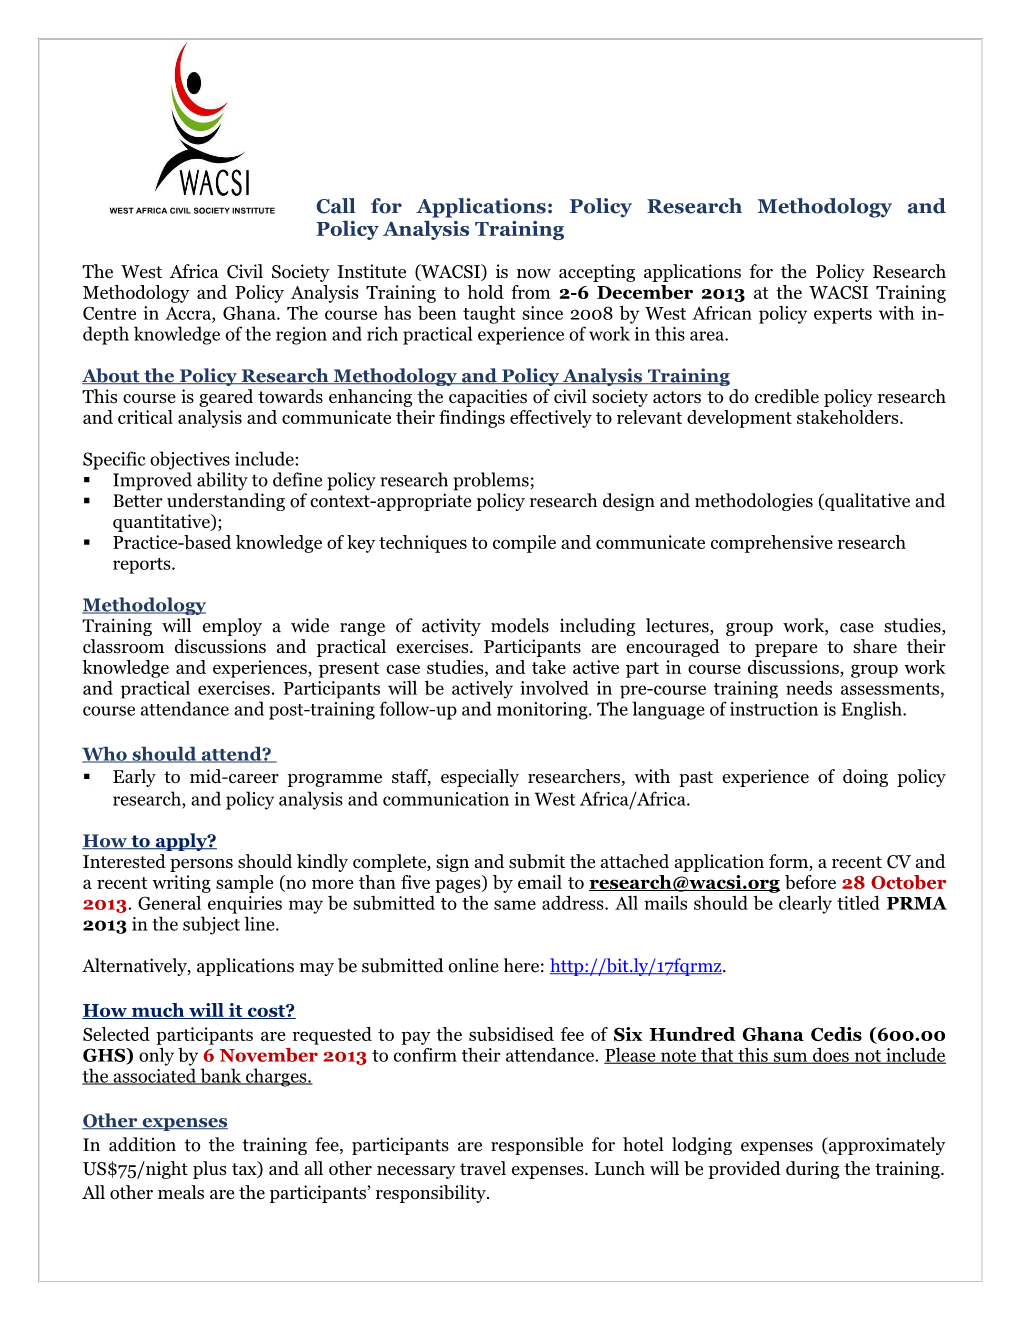 Call for Applications: Policy Research Methodology and Policy Analysis Training